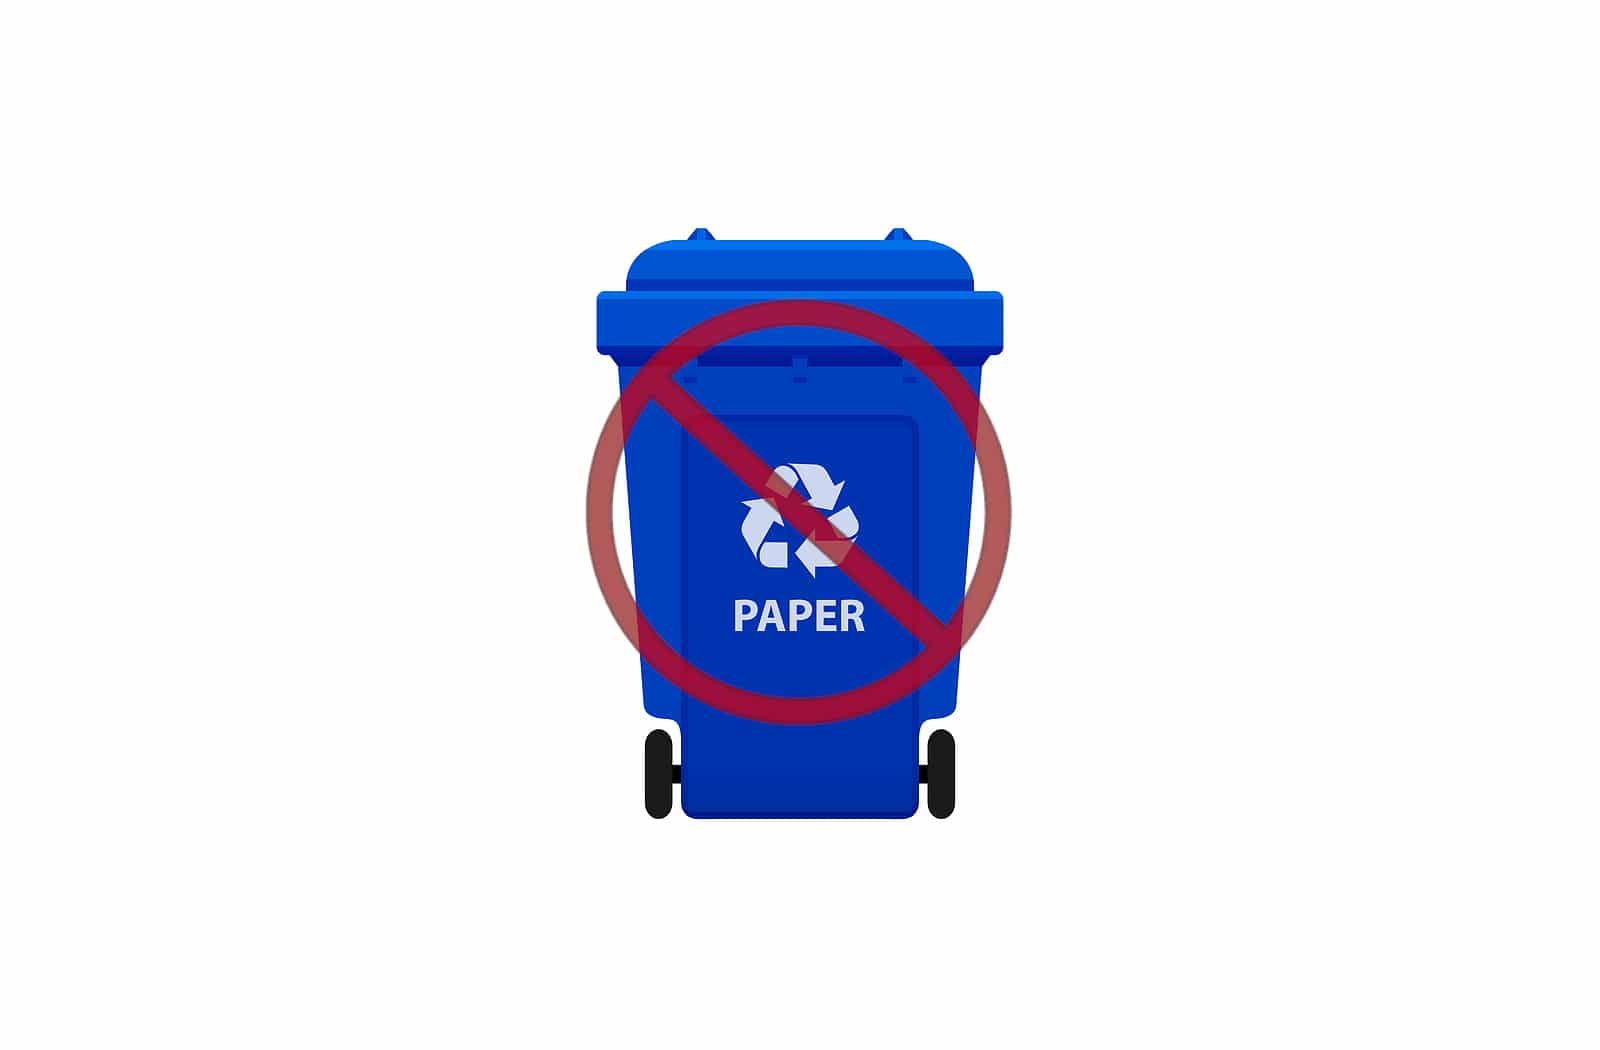 A Blue Recycling Bin with a Red Do Not Use Shape above